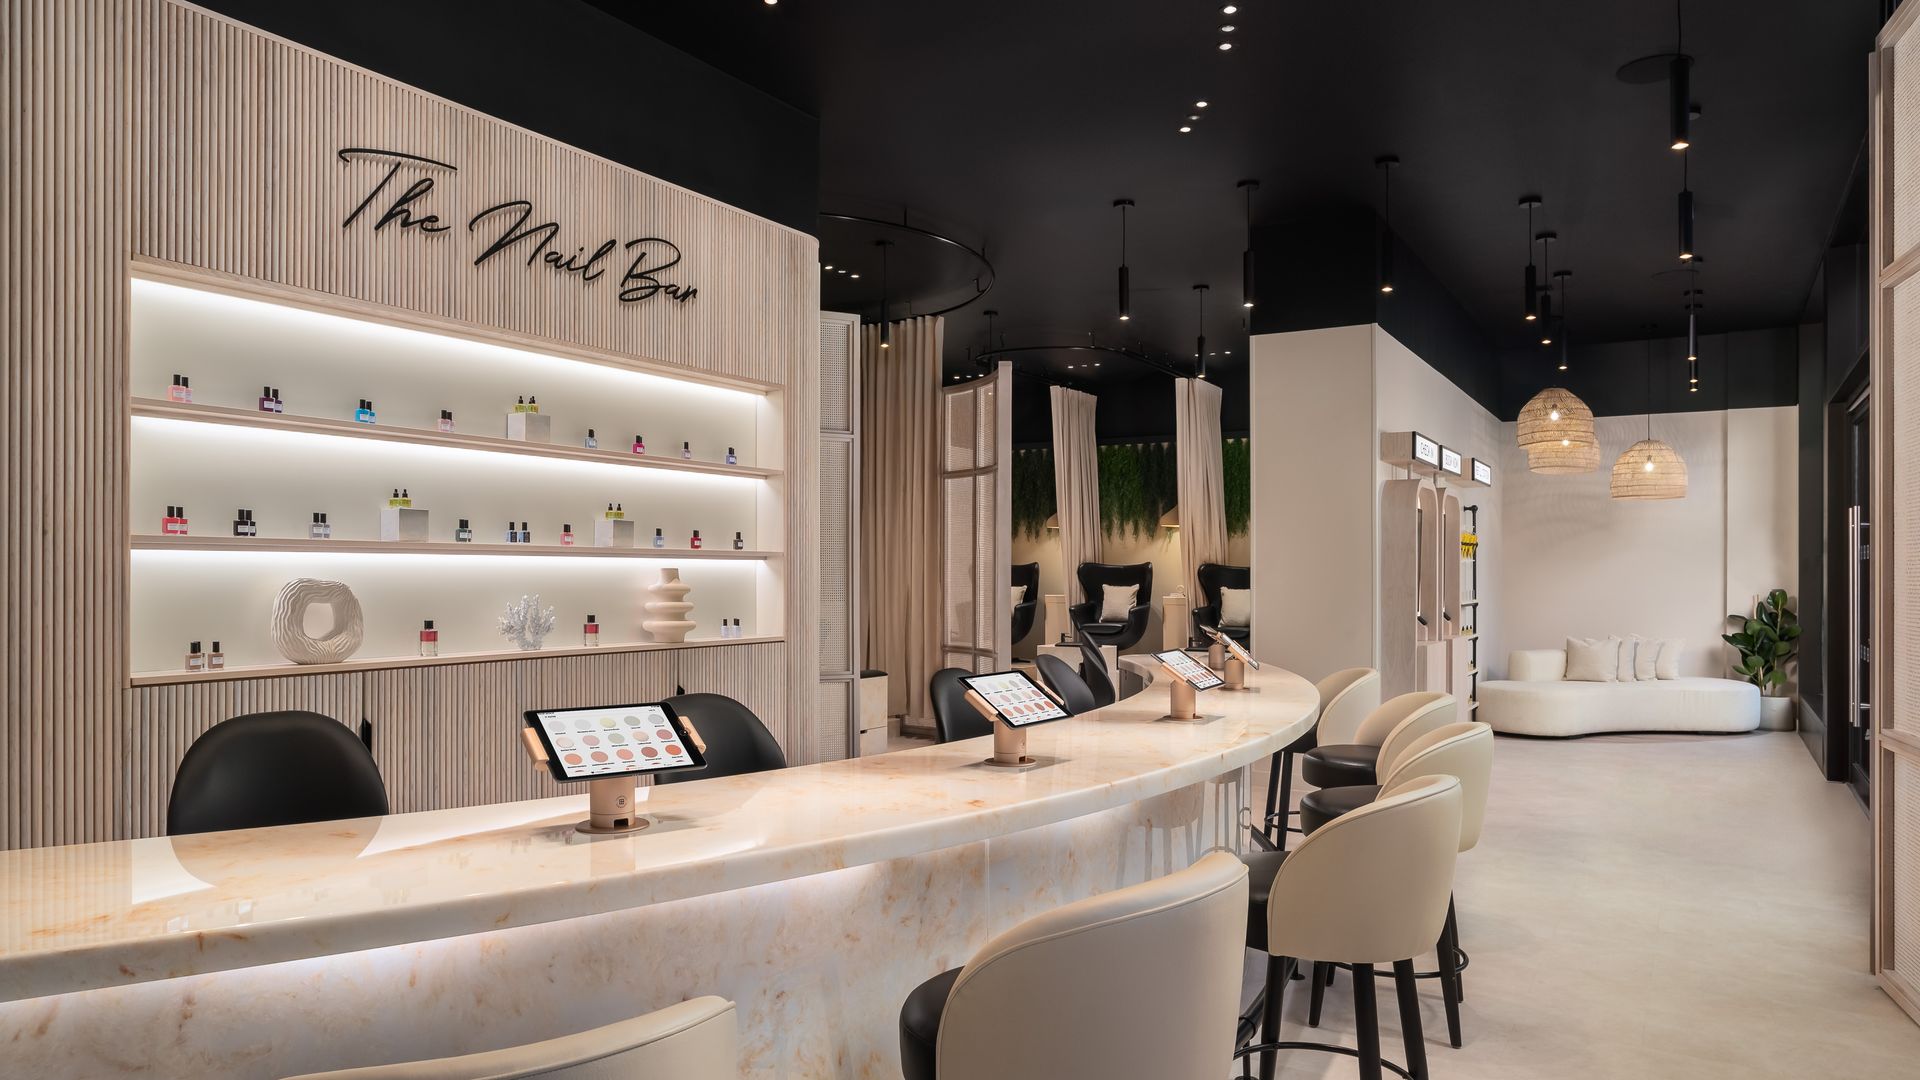 Marble bar with white chairs and iPads to select nail shades